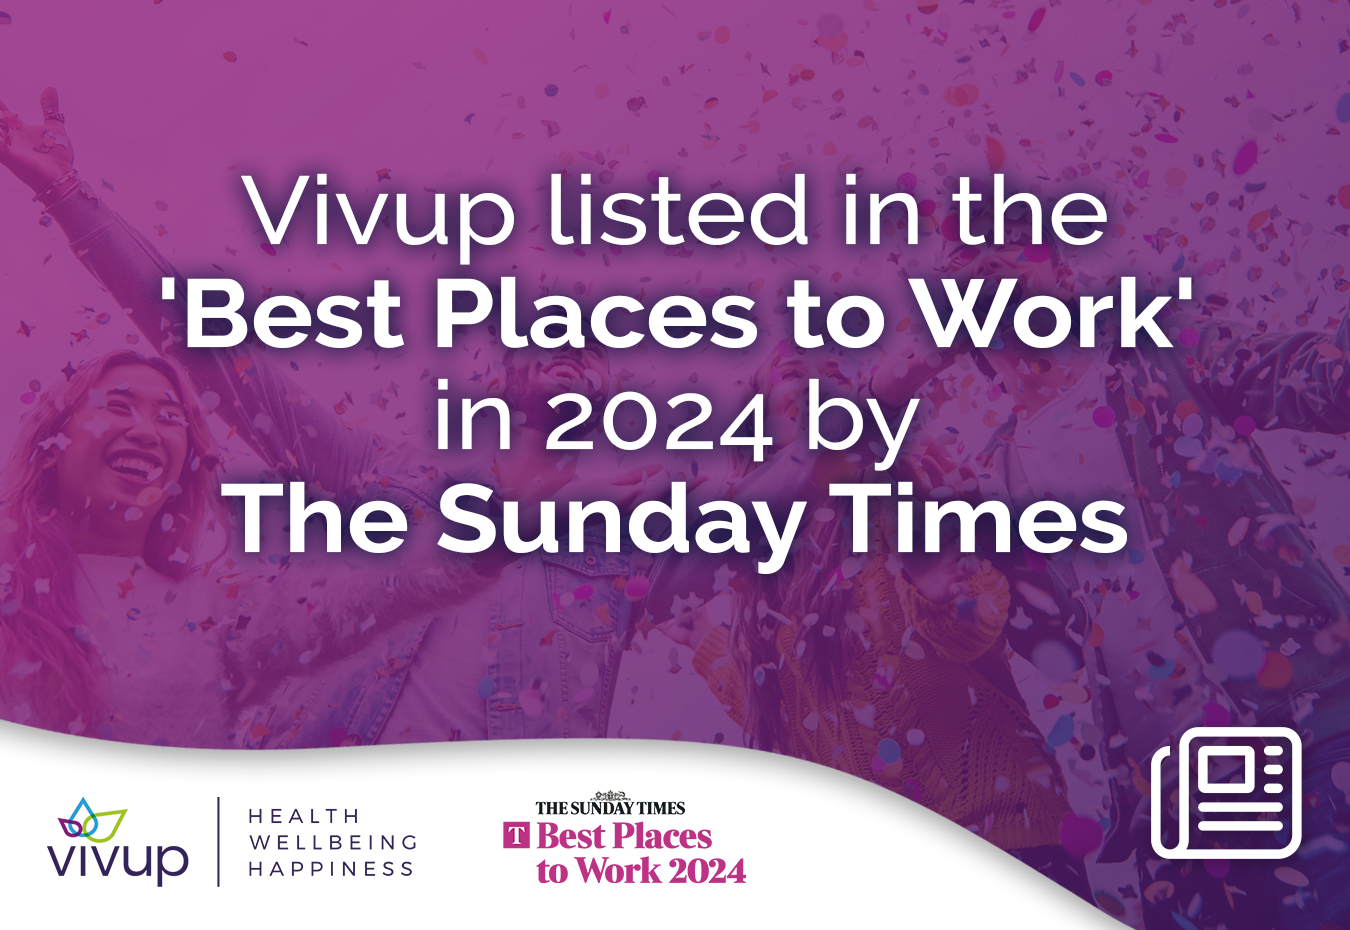 Vivup listed in the Best Places To Work in 2024 by The Sunday Times